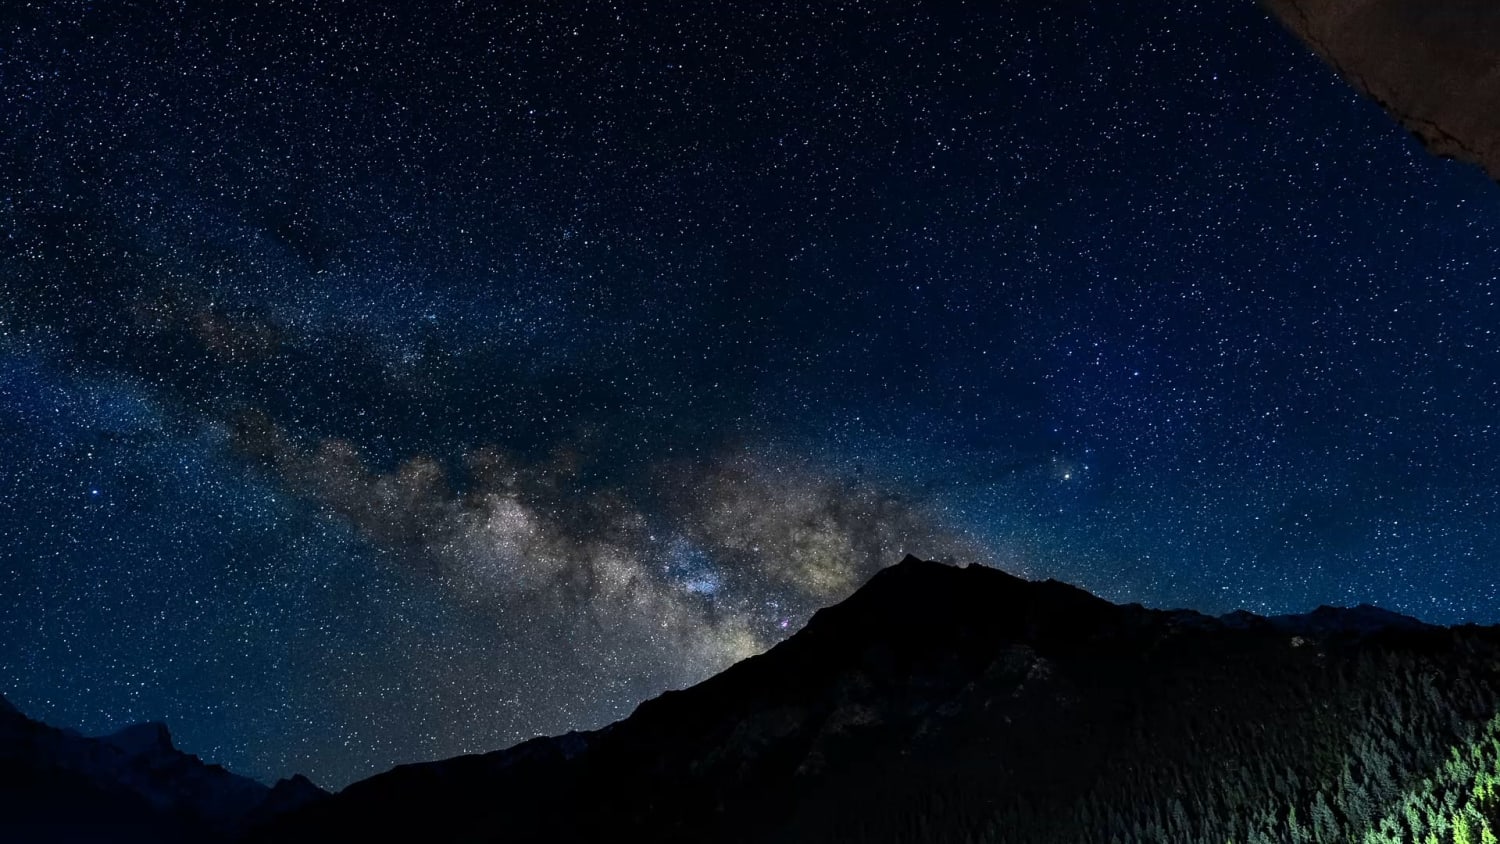 Milkway Timelapse over Chitkul village - 24 May 2022